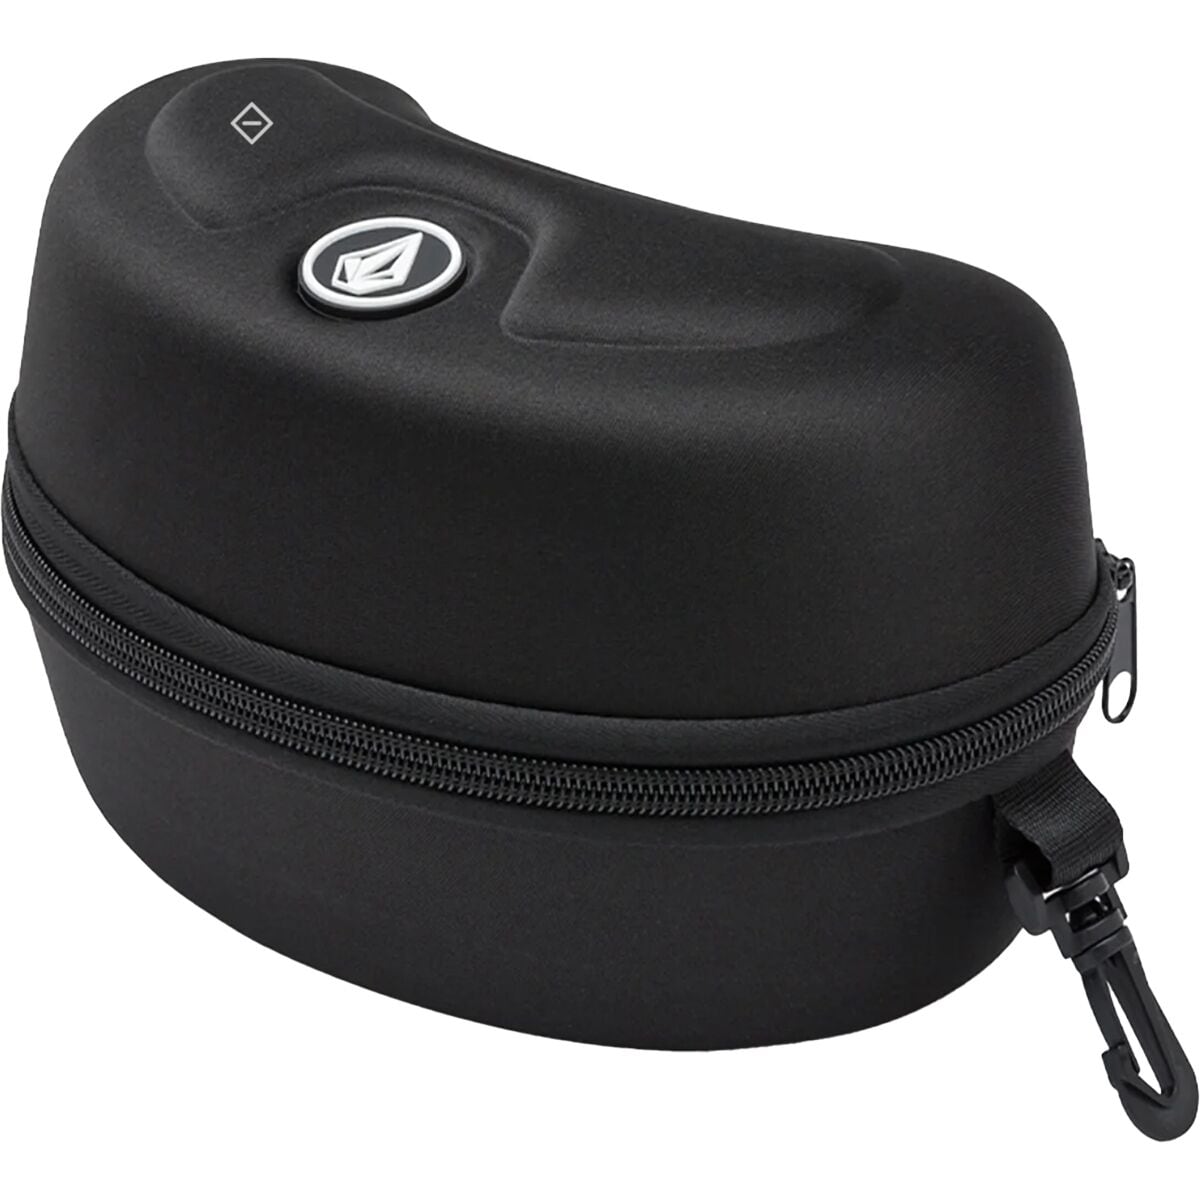 Volcom Goggle Thermal Case